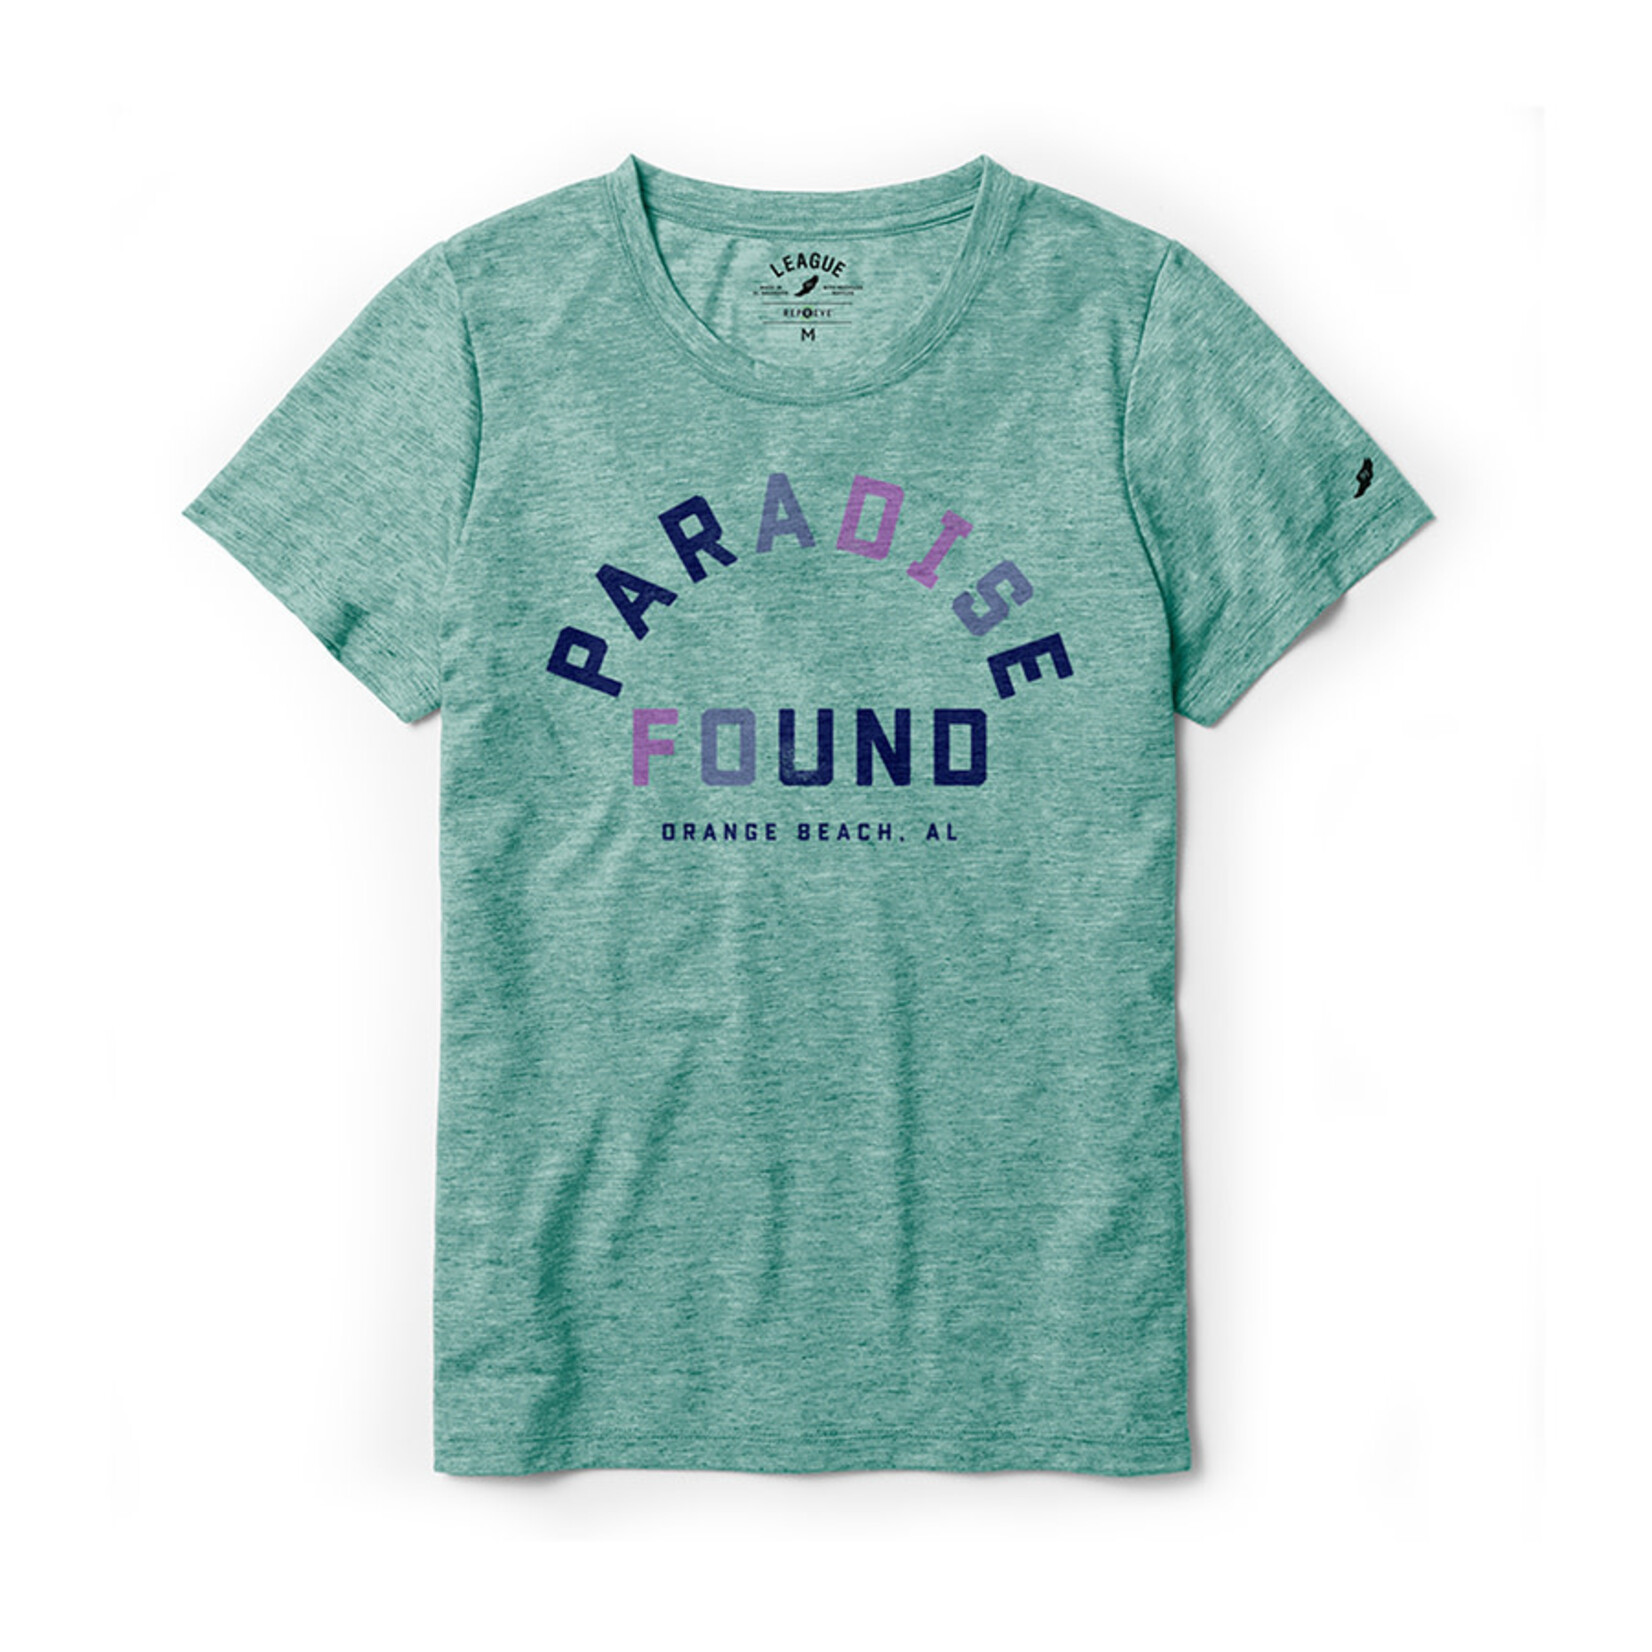 L2 Brands Paradise Found Tee